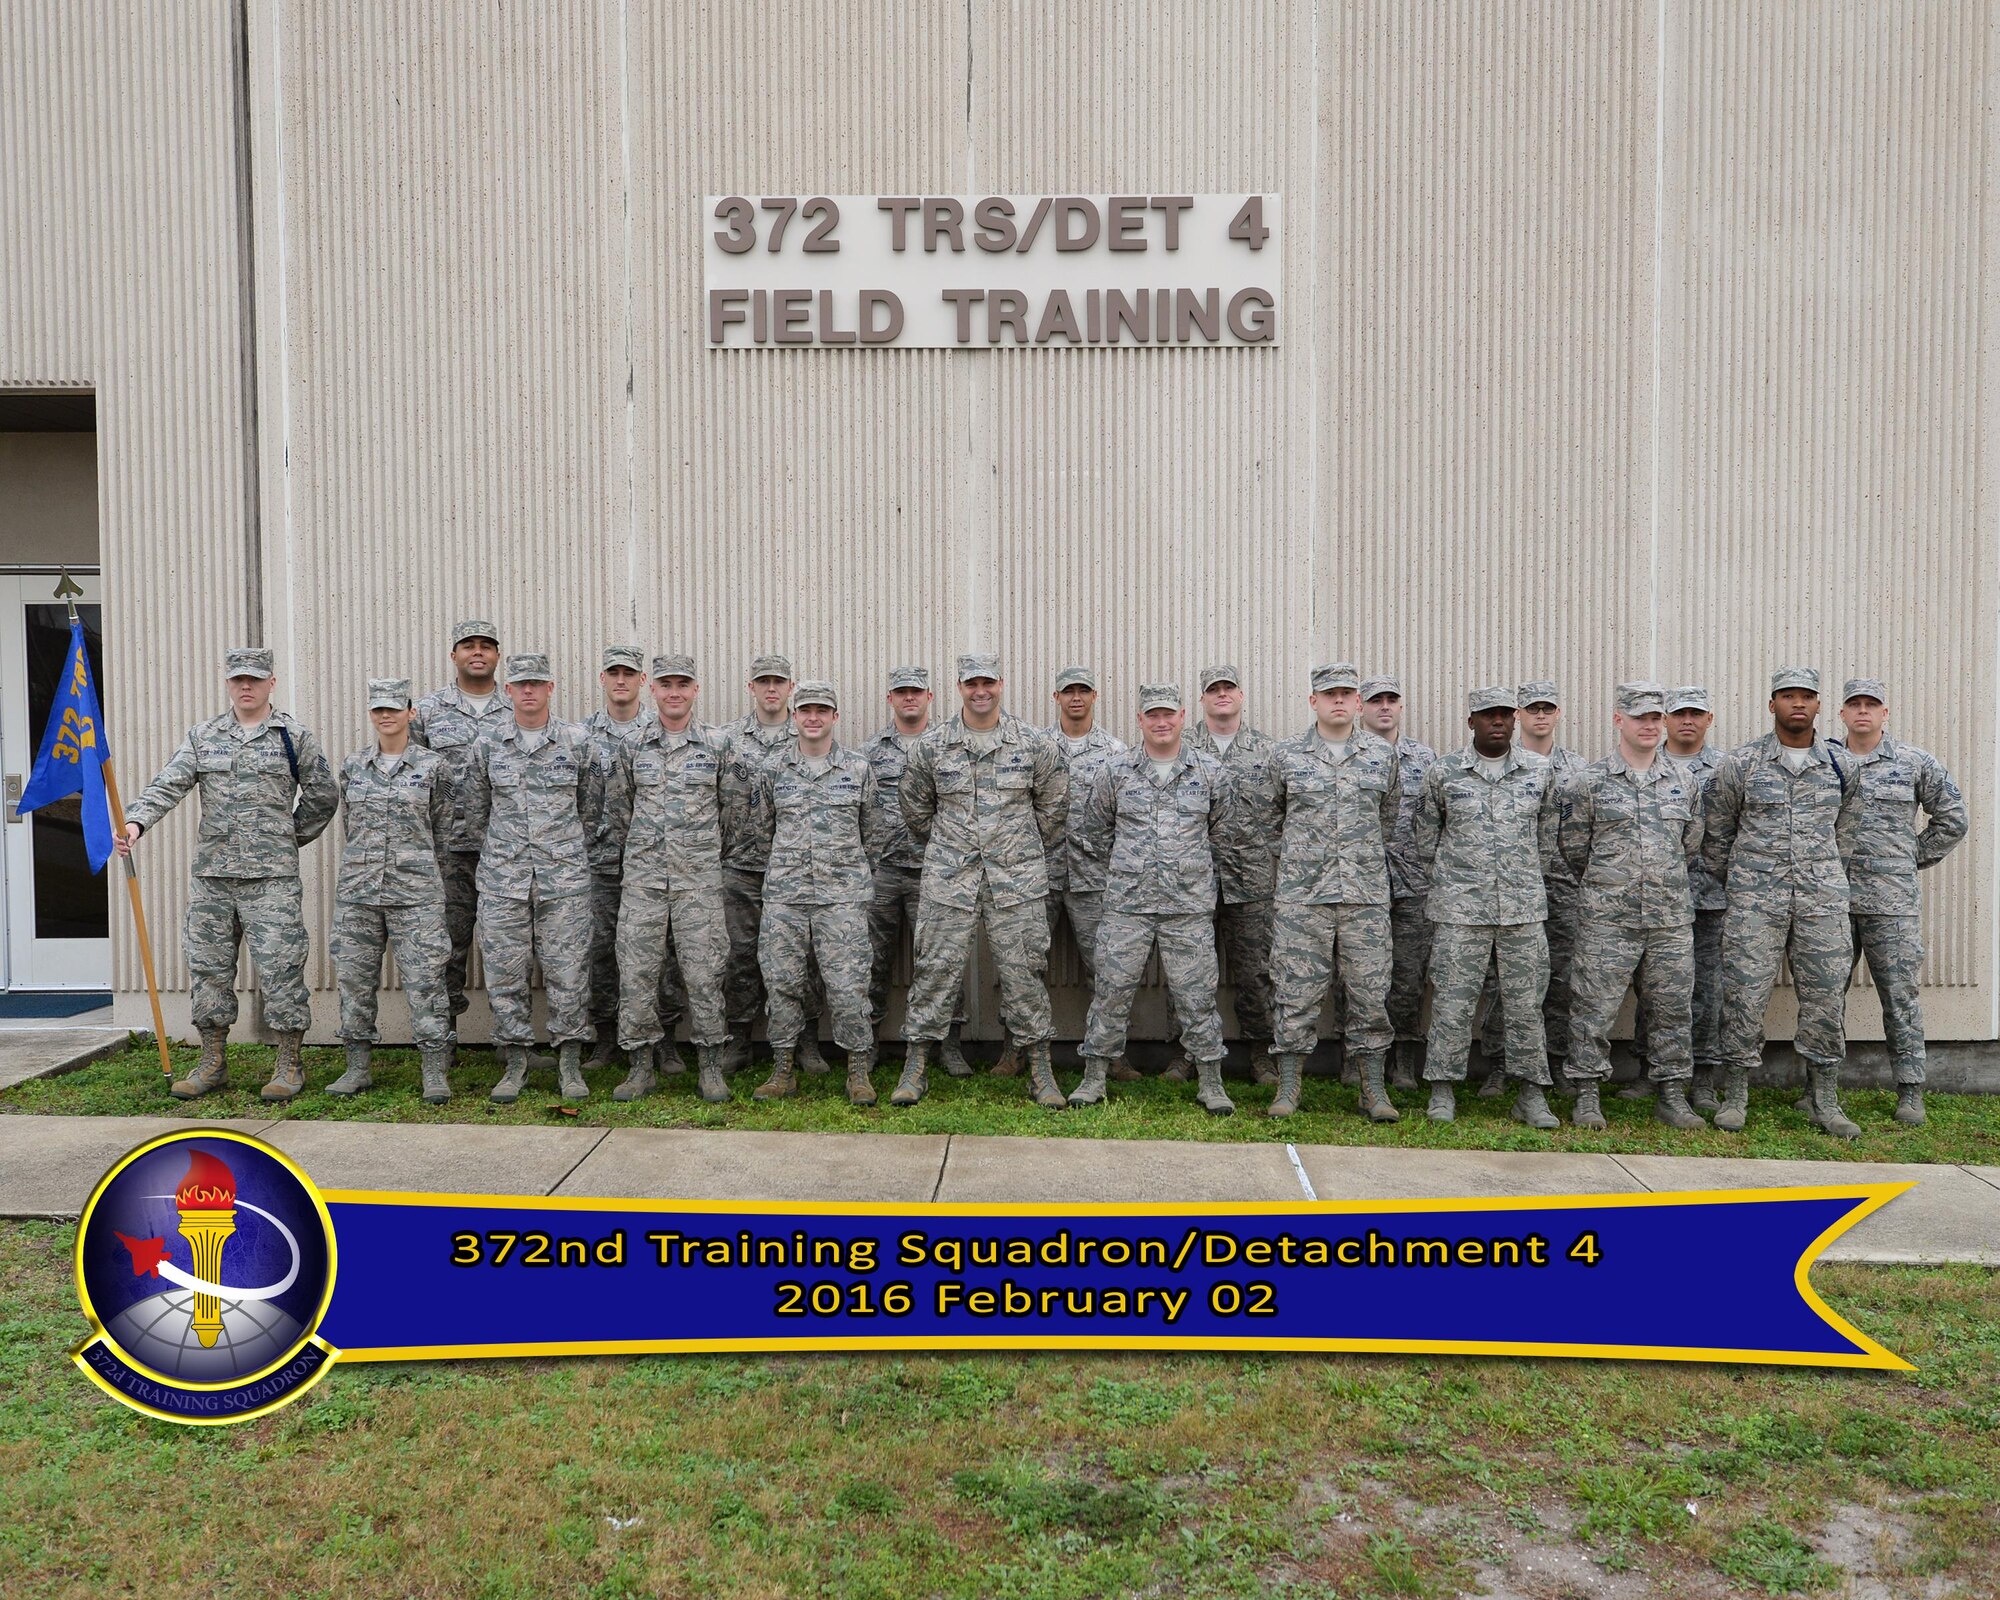 The “Raptor Teachers” of Detachment 4 consists of 14 instructors who instruct over 400 maintainers across eight AFSCs providing worldwide and local training on F-22 aircraft systems and support equipment for the 325th Fighter Wing active duty, Air National Guard and Reserve units. 